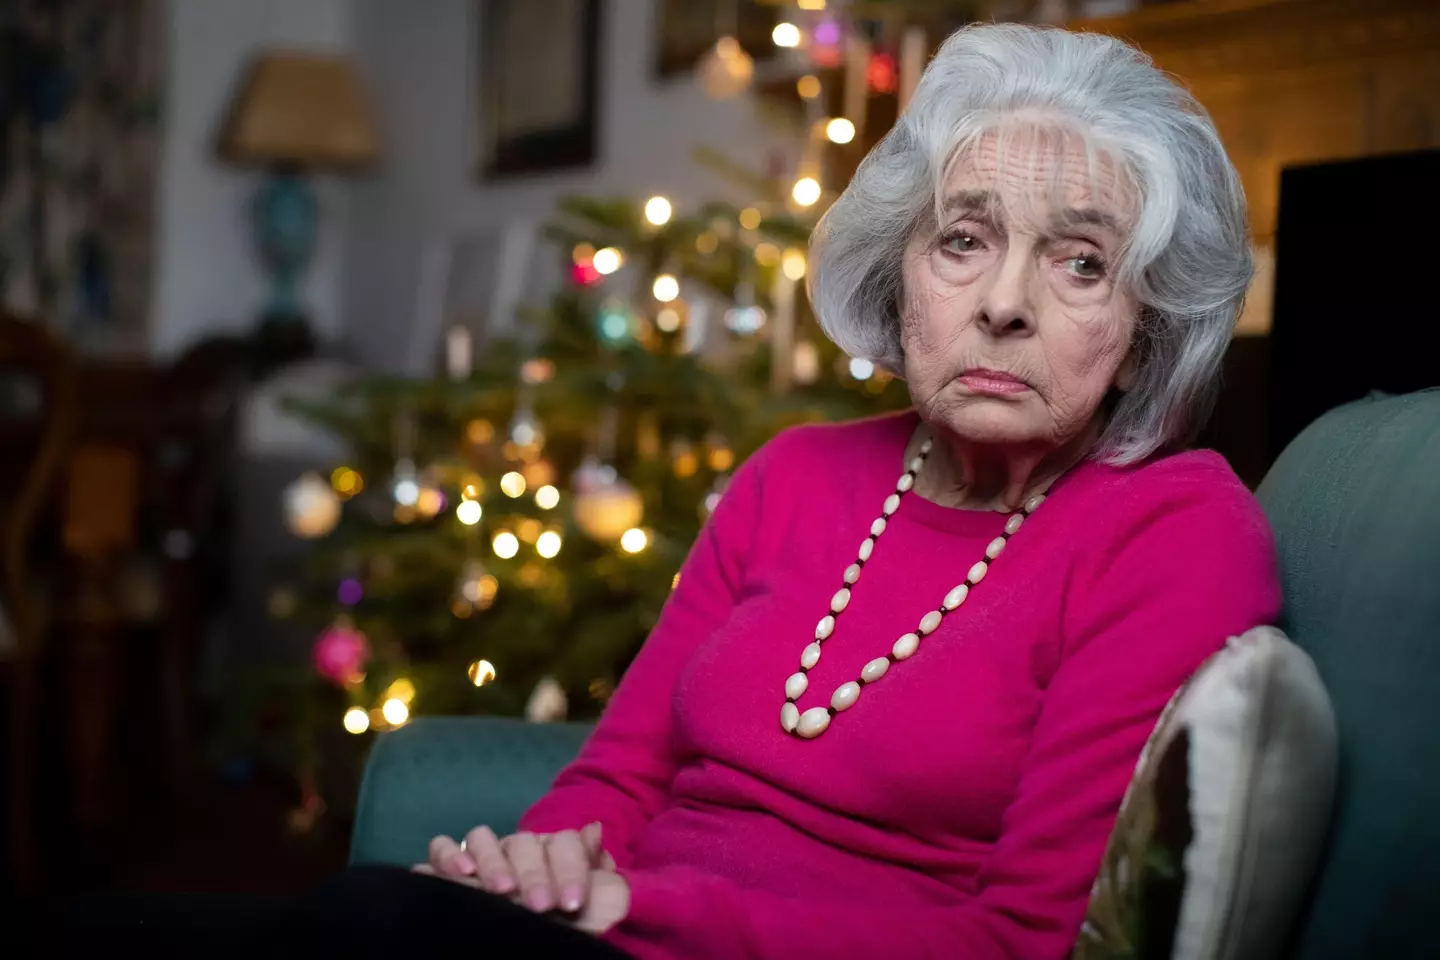 Twitter users said their elderly relatives spent Christmas 2020 alone (